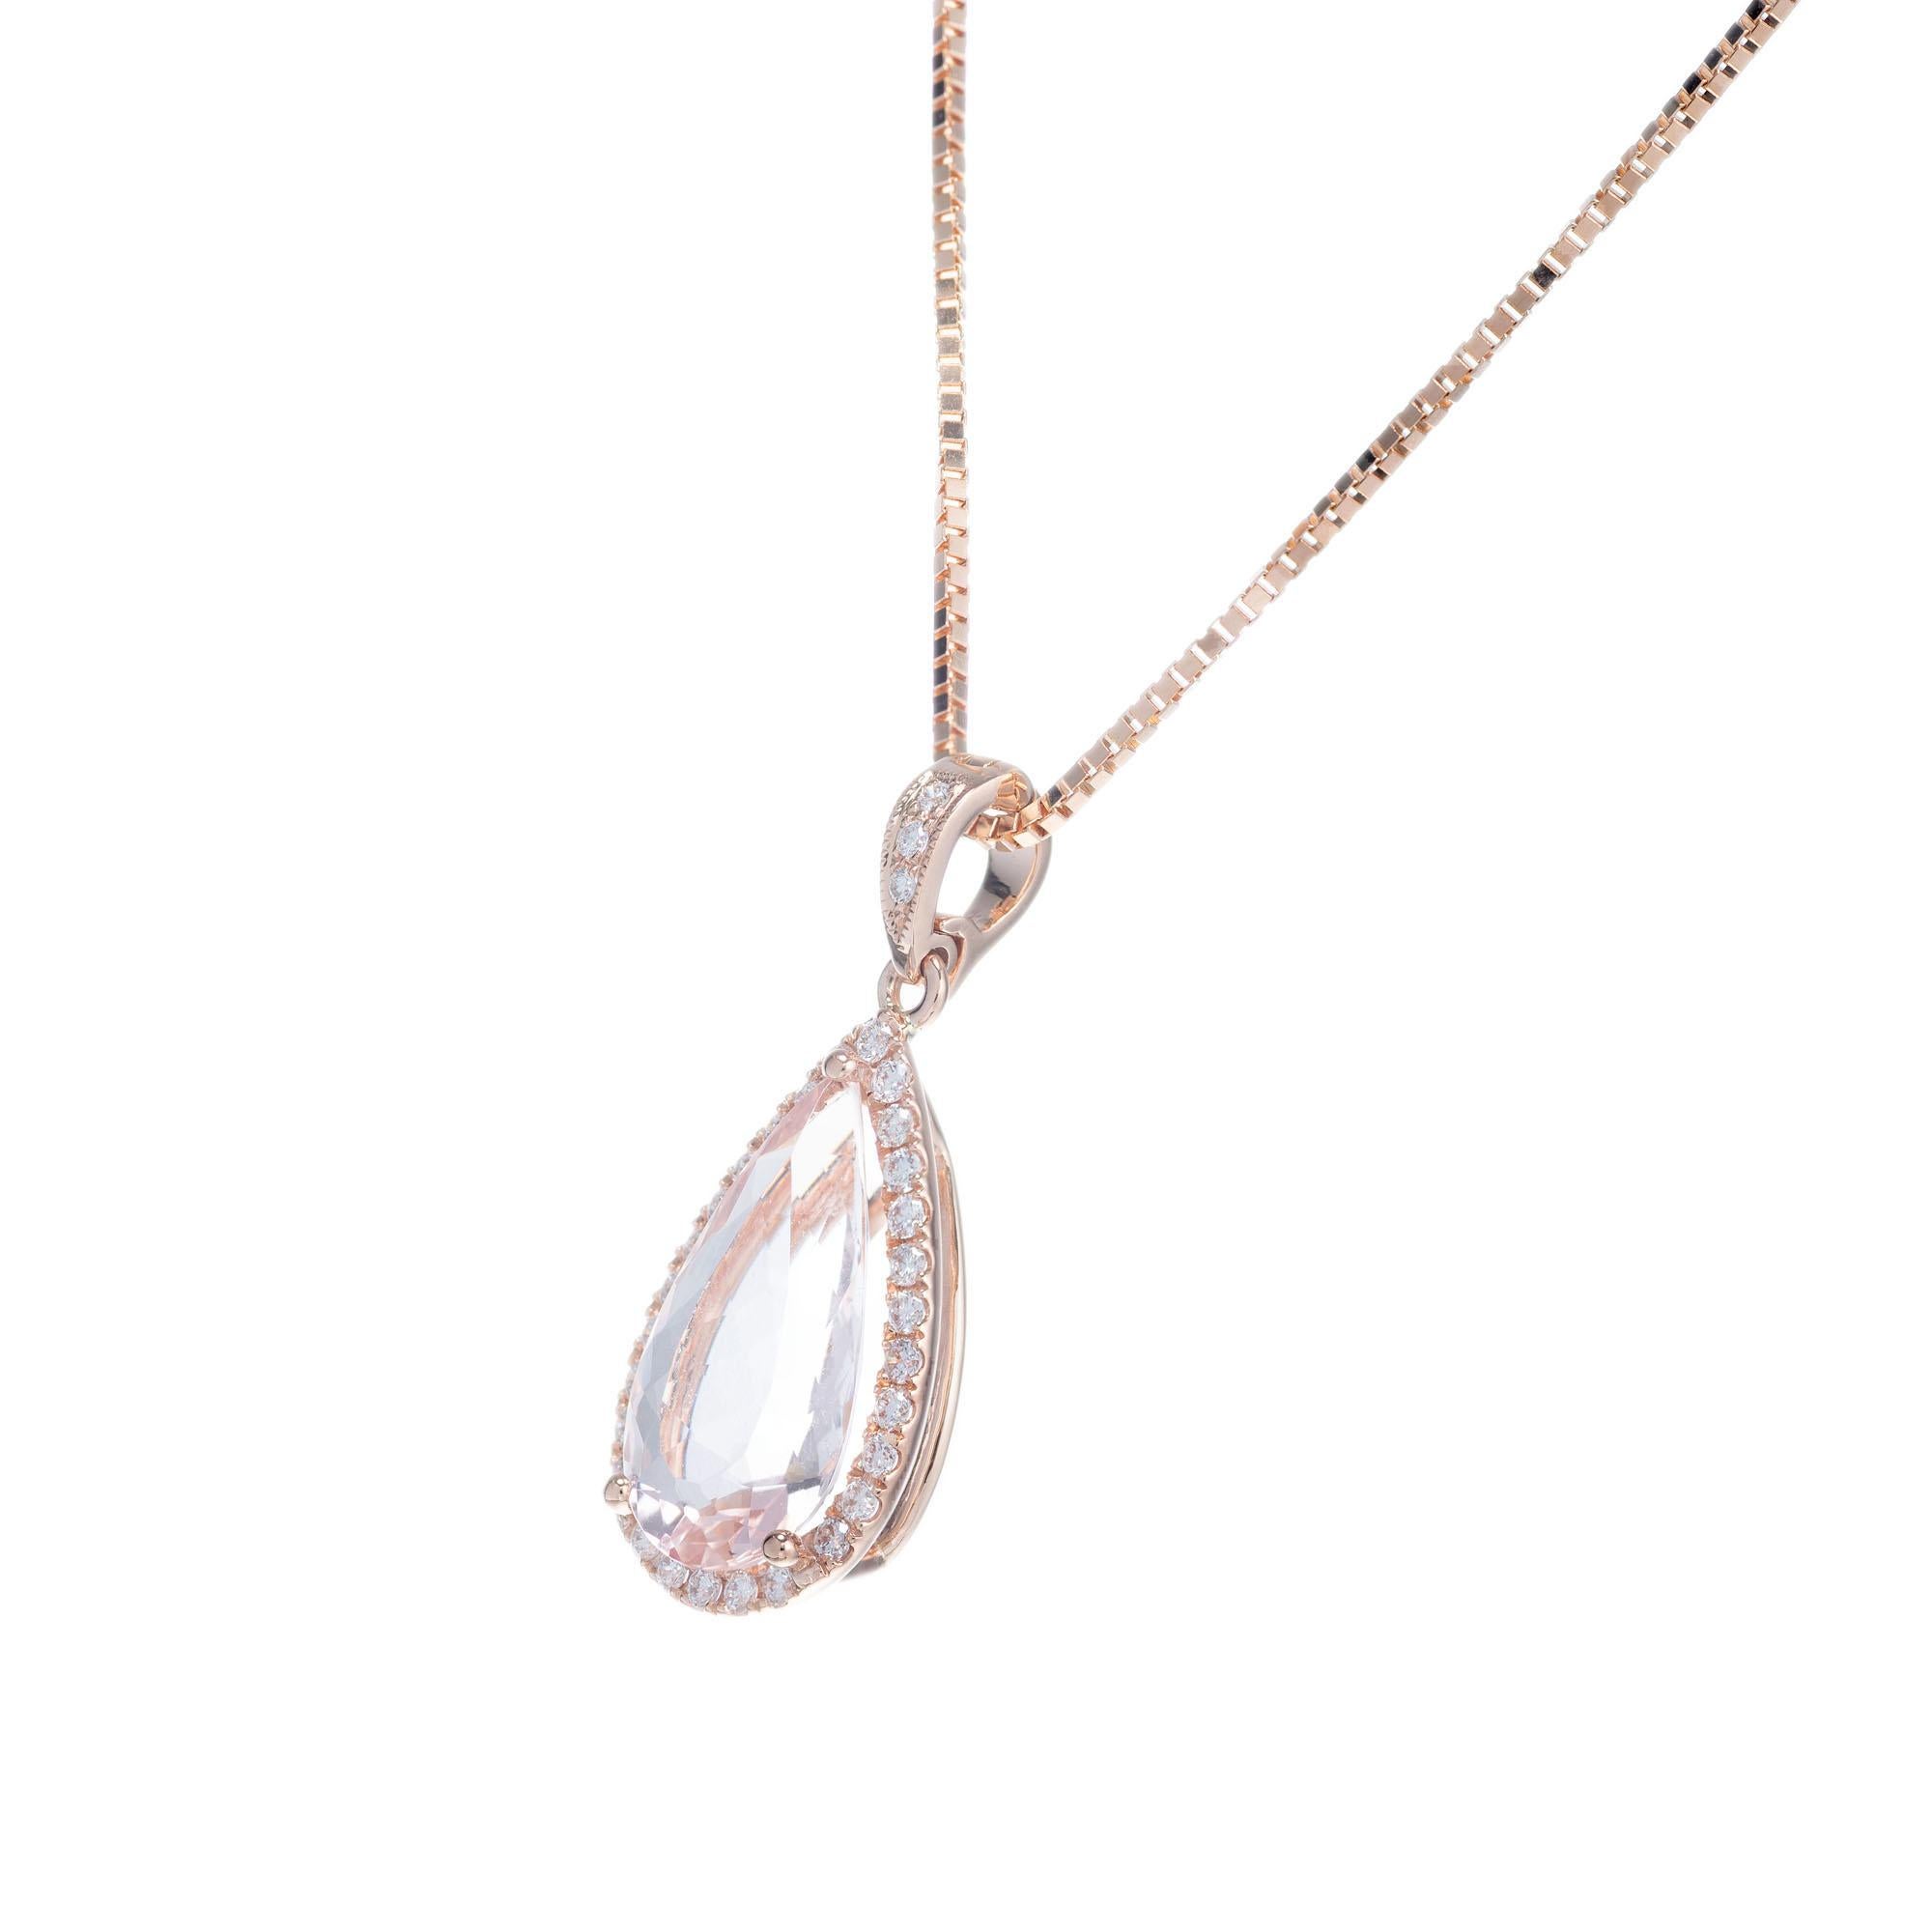 Pear shape 2.68 carat morganite surrounded by a halo of full cut diamonds, in a rose gold pendant necklace setting from the Peter Suchy Workshop. 16 inch 14k rose gold box chain

1 pear shape pink morganite, approx. 2.68cts
31 round brilliant cut